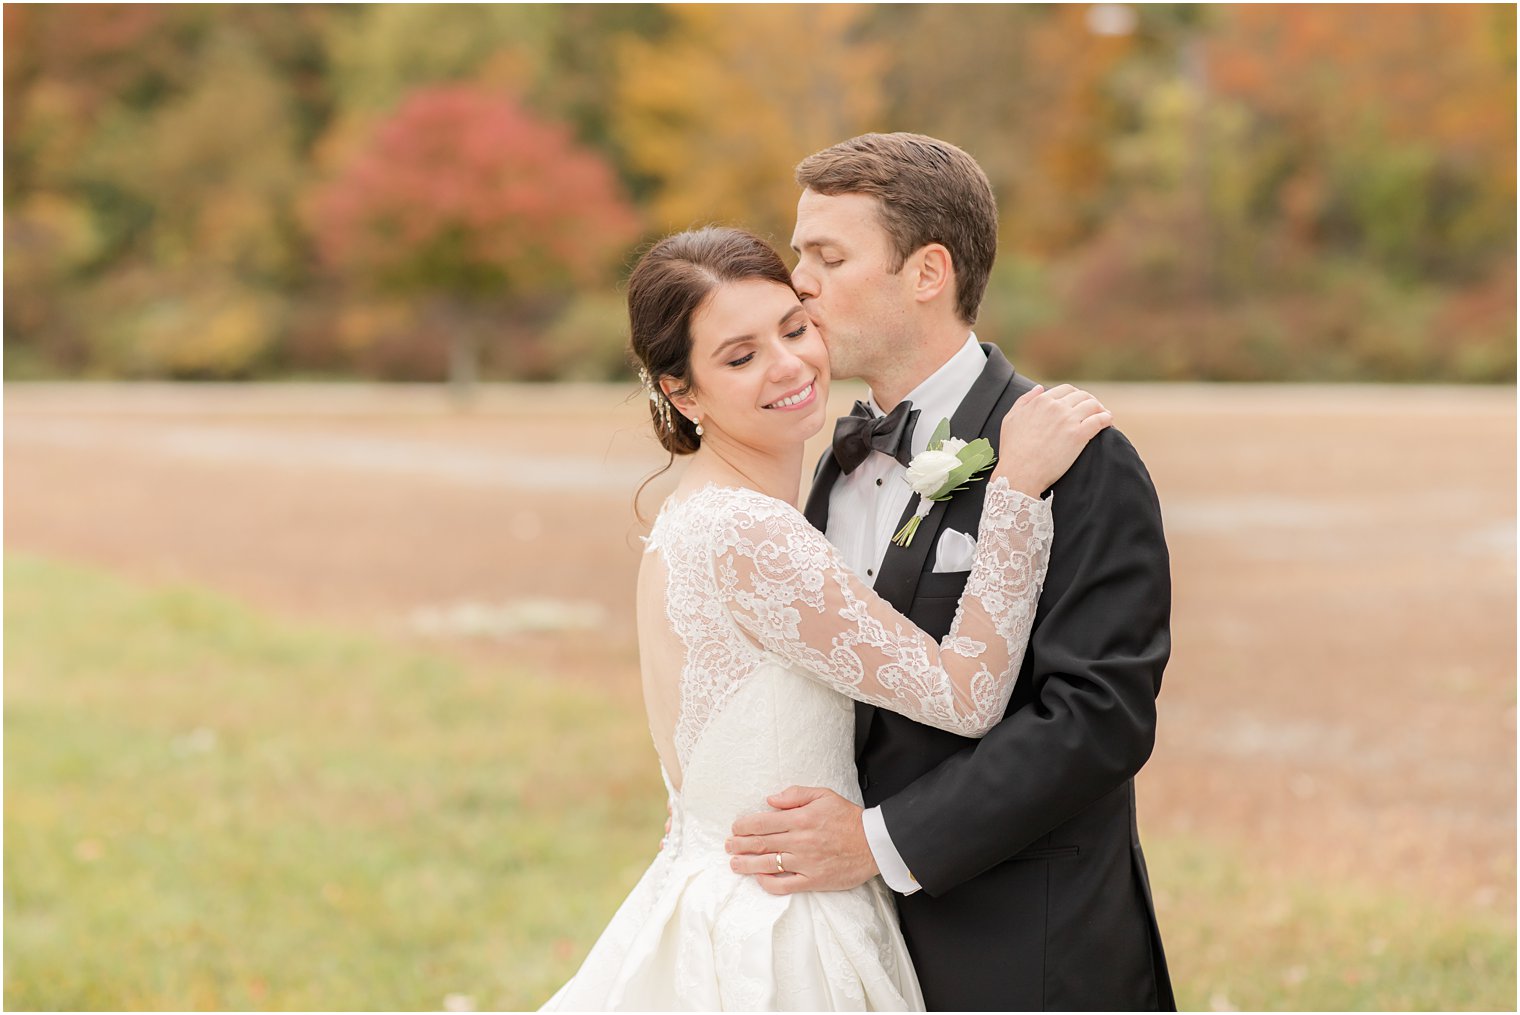 New Jersey wedding portraits of bride and groom